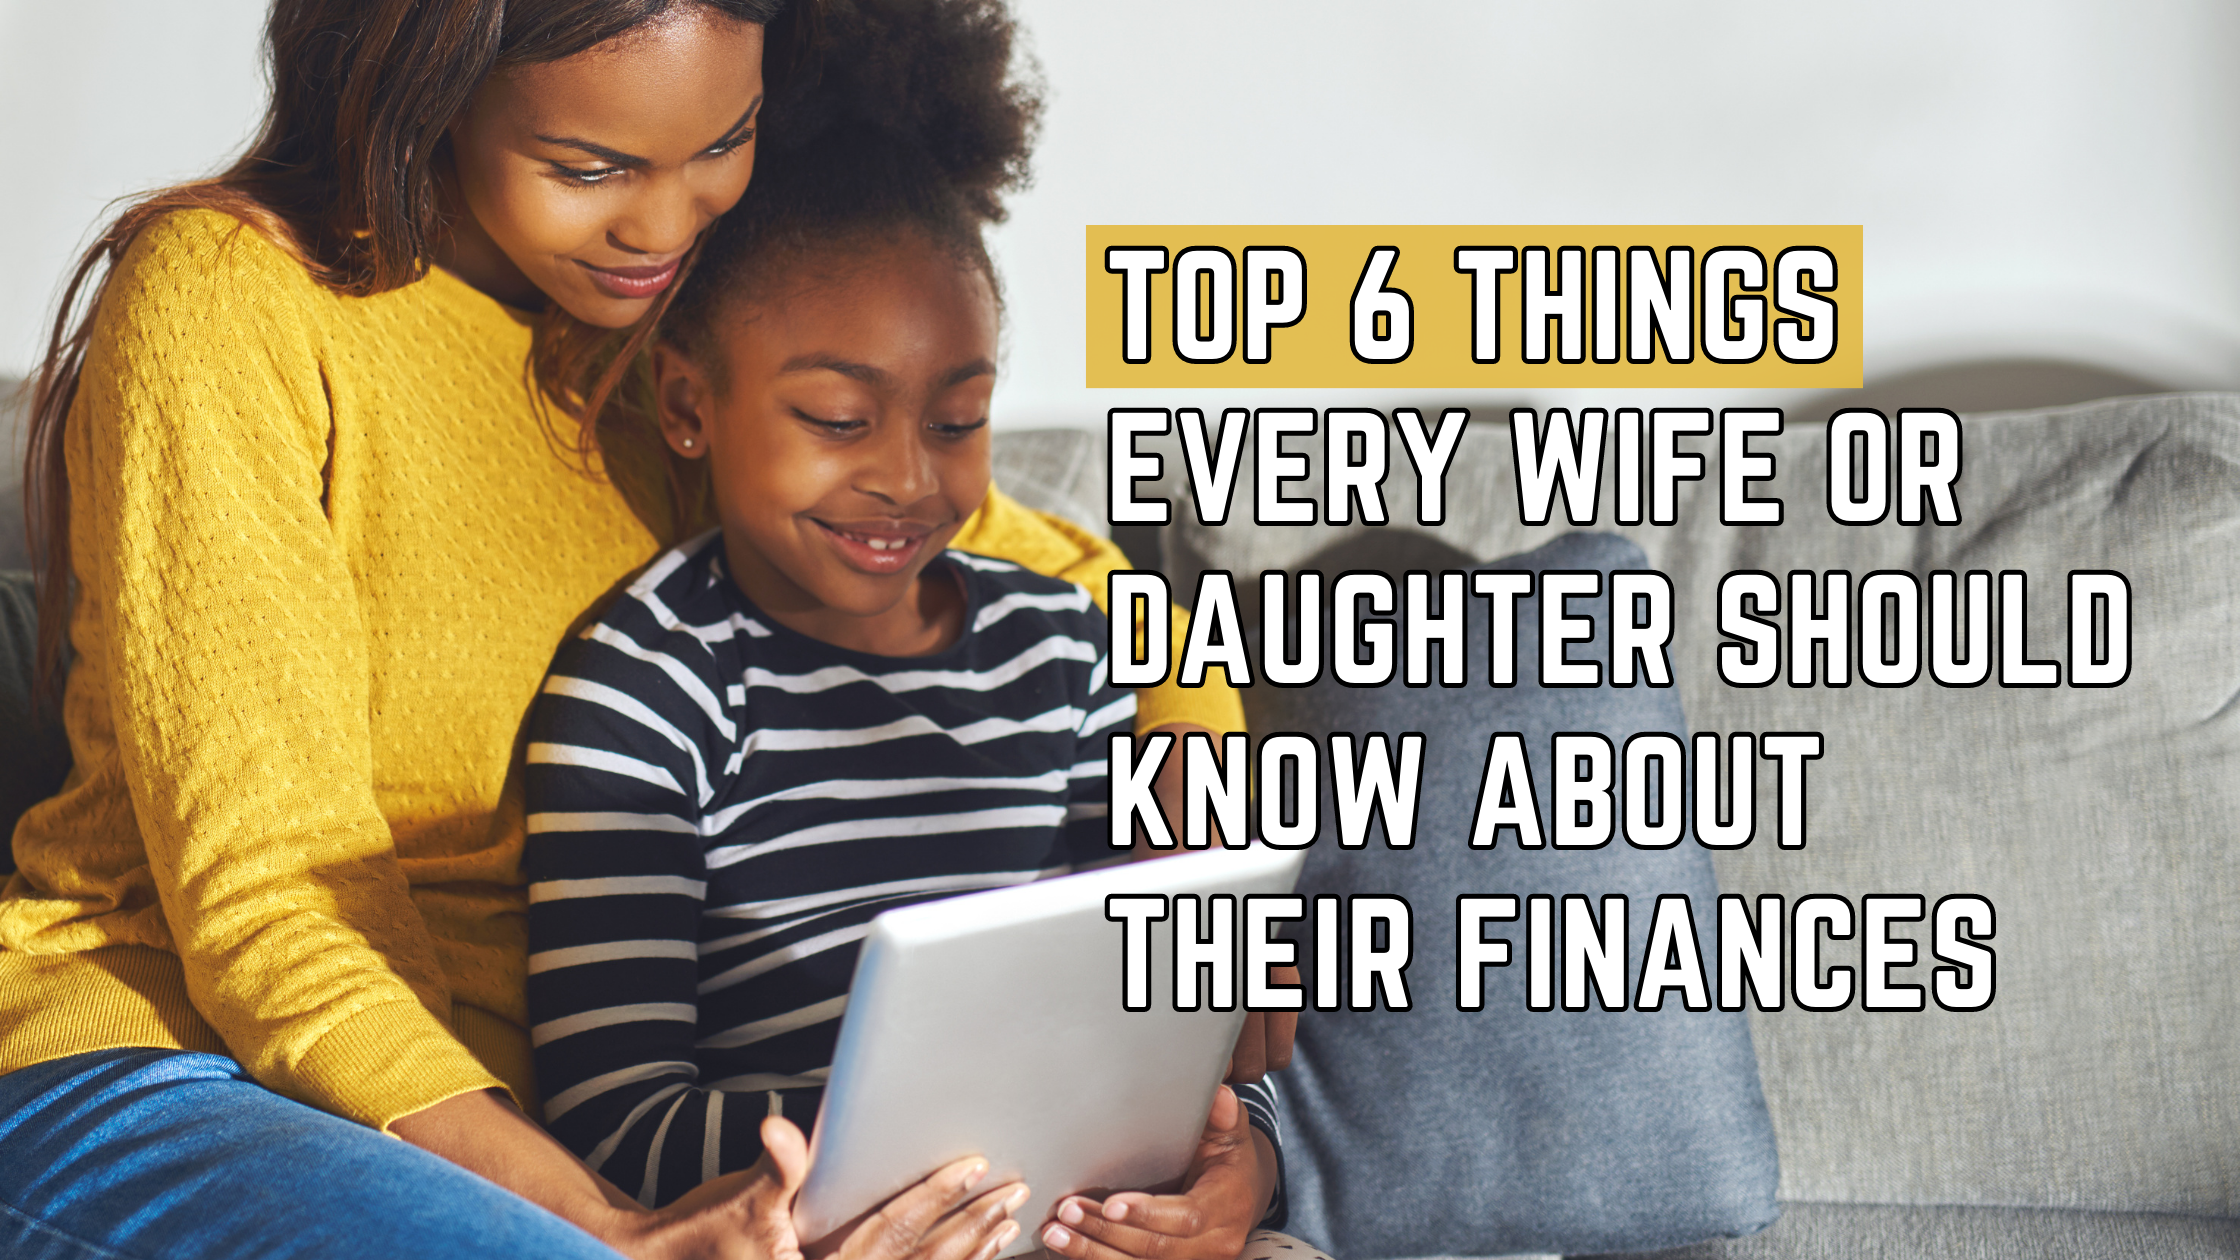 Top 6 Things Every Wife or Daughter Should Know About their Finances